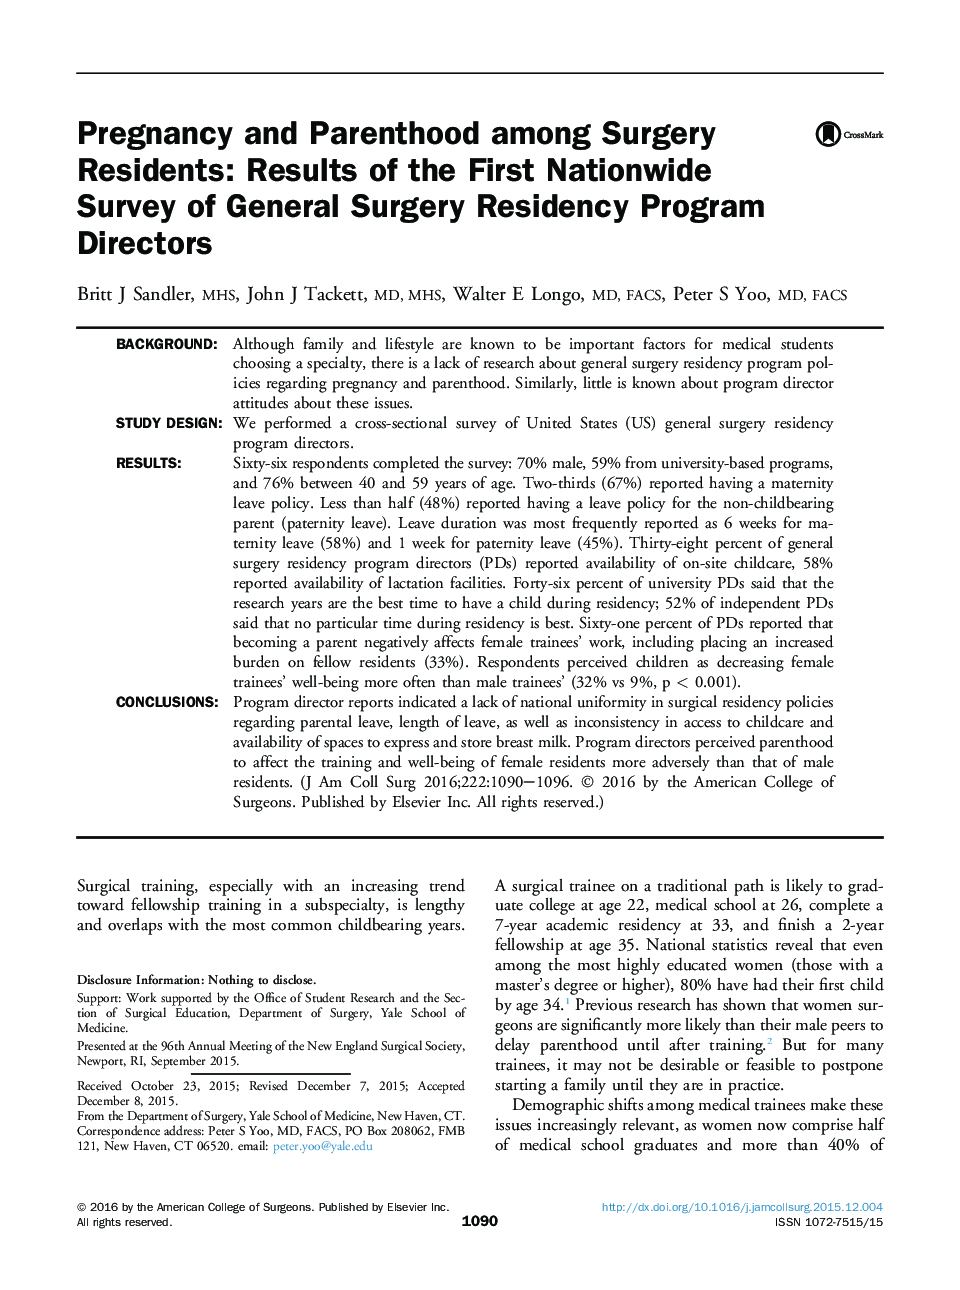 Pregnancy and Parenthood among Surgery Residents: Results of the First Nationwide Survey of General Surgery Residency Program Directors 